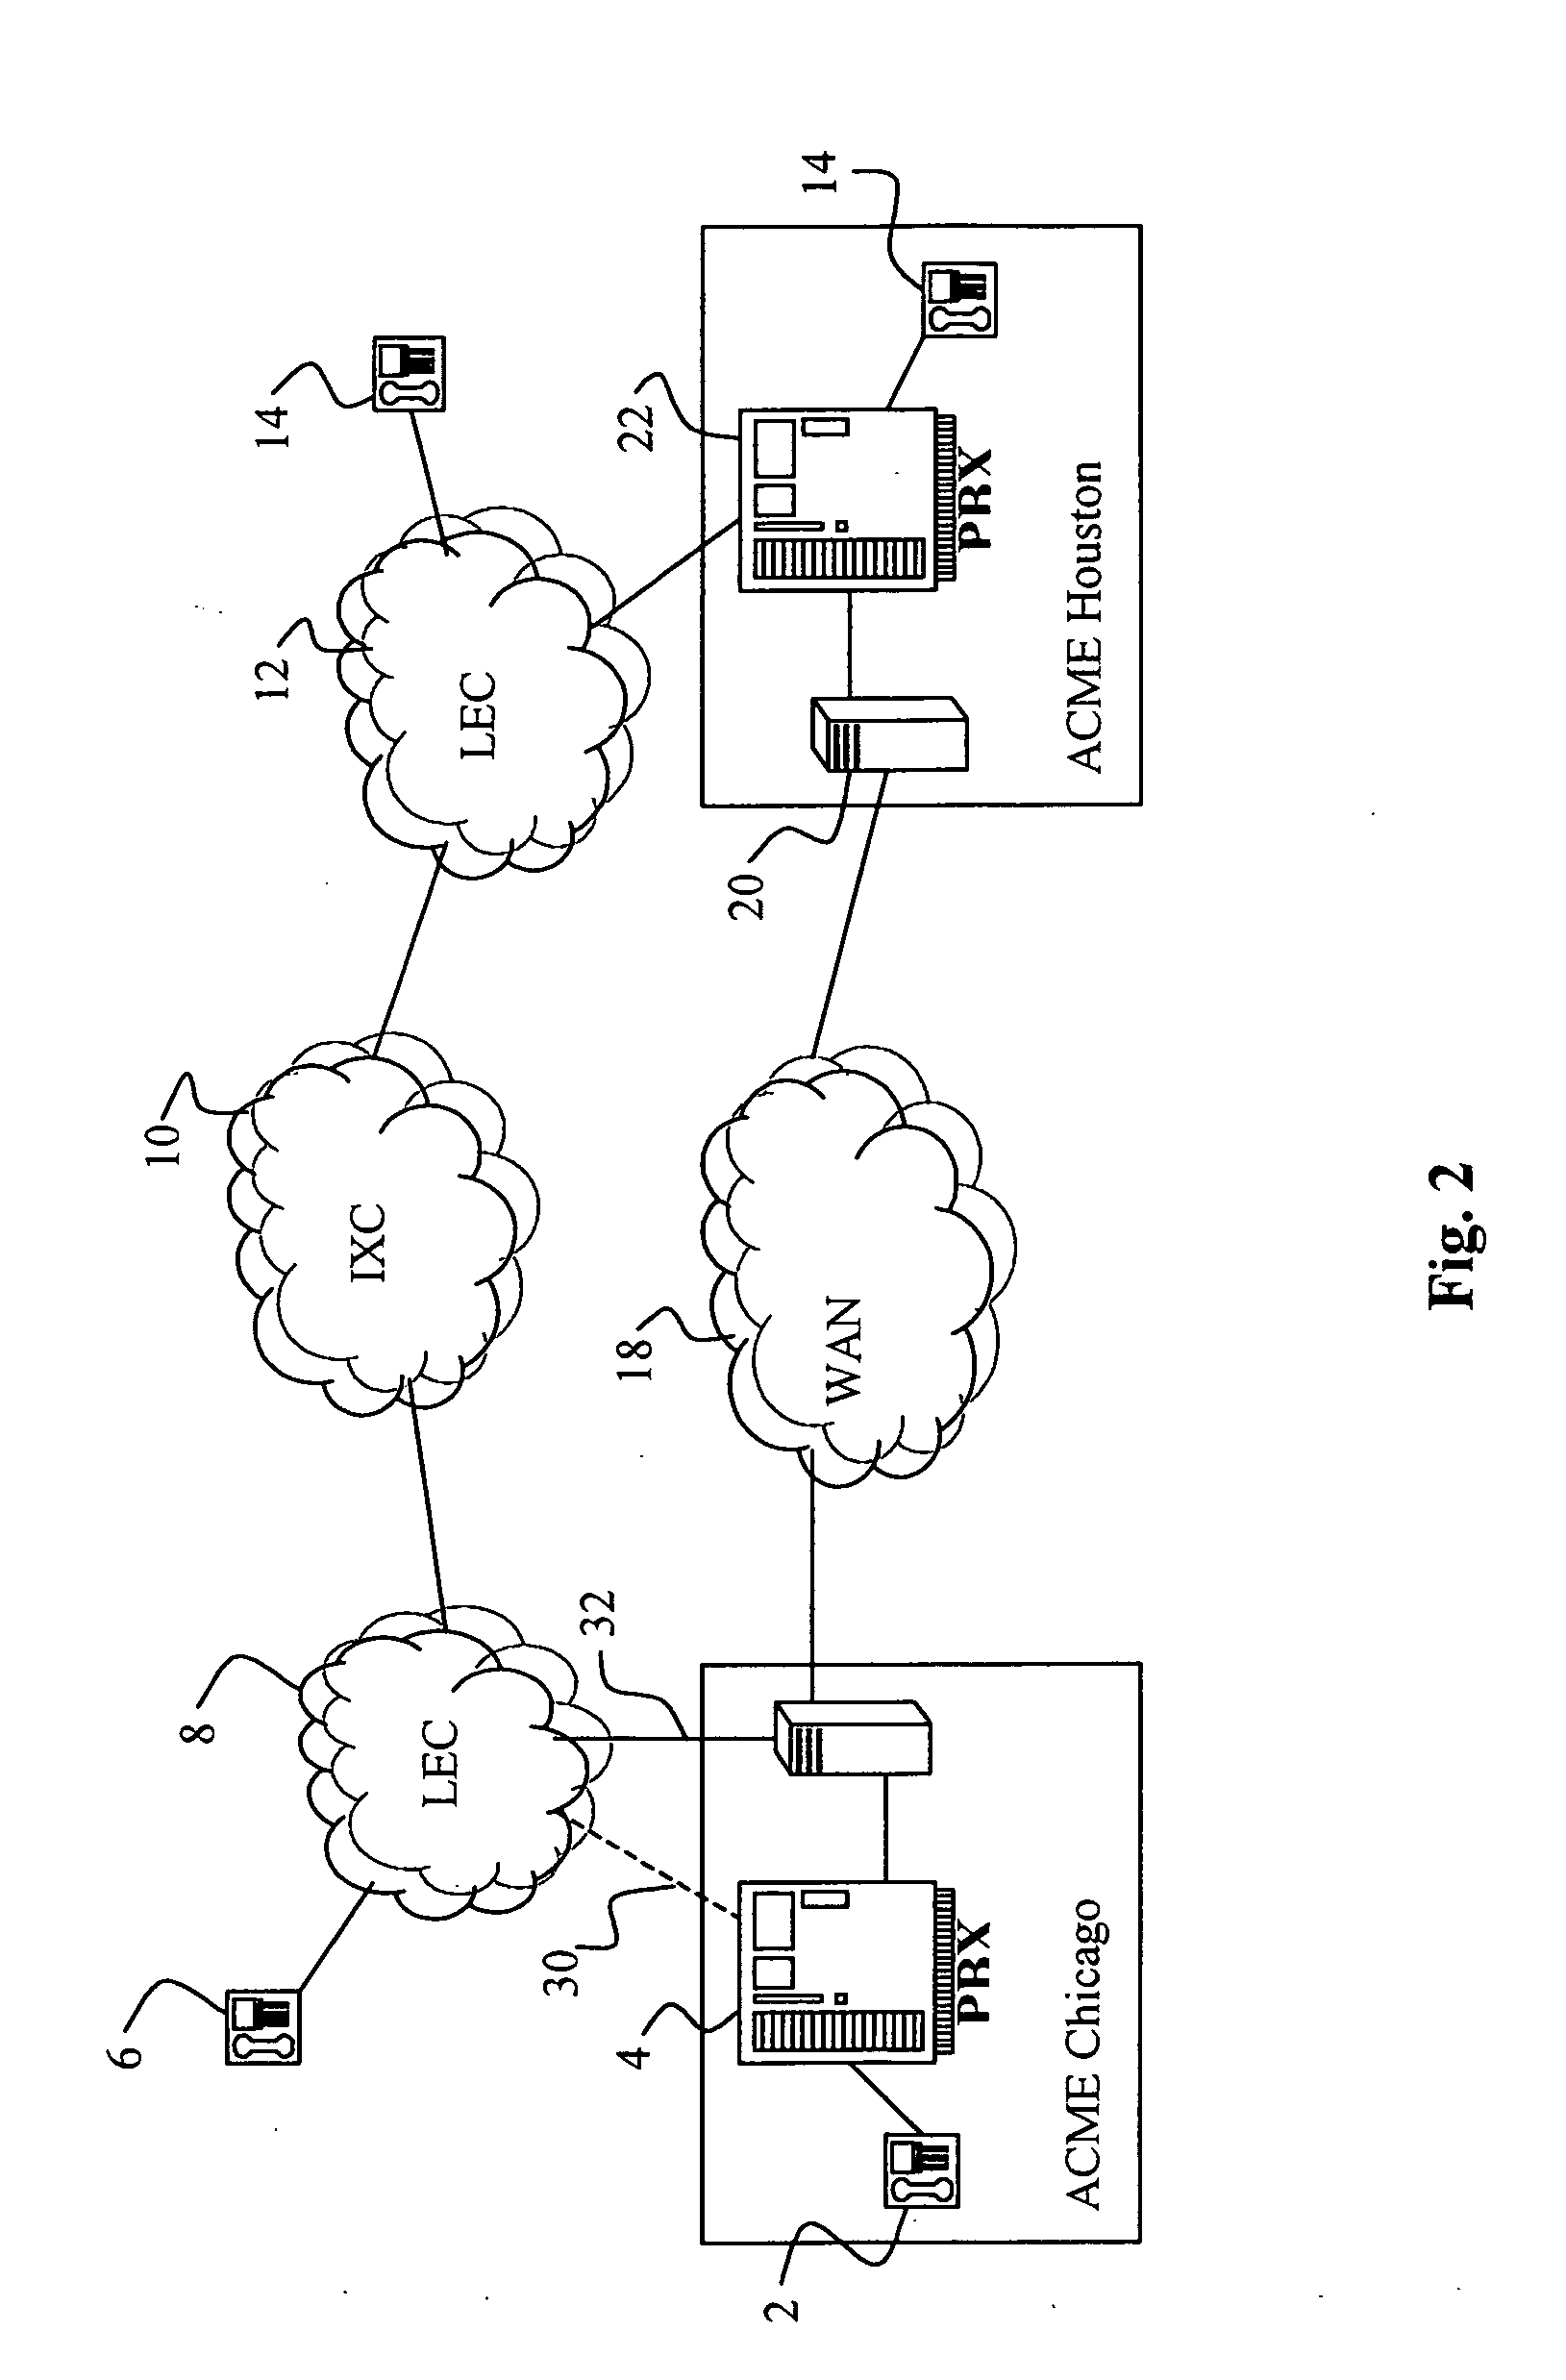 Method and dial plan for packet based voice communications functionality